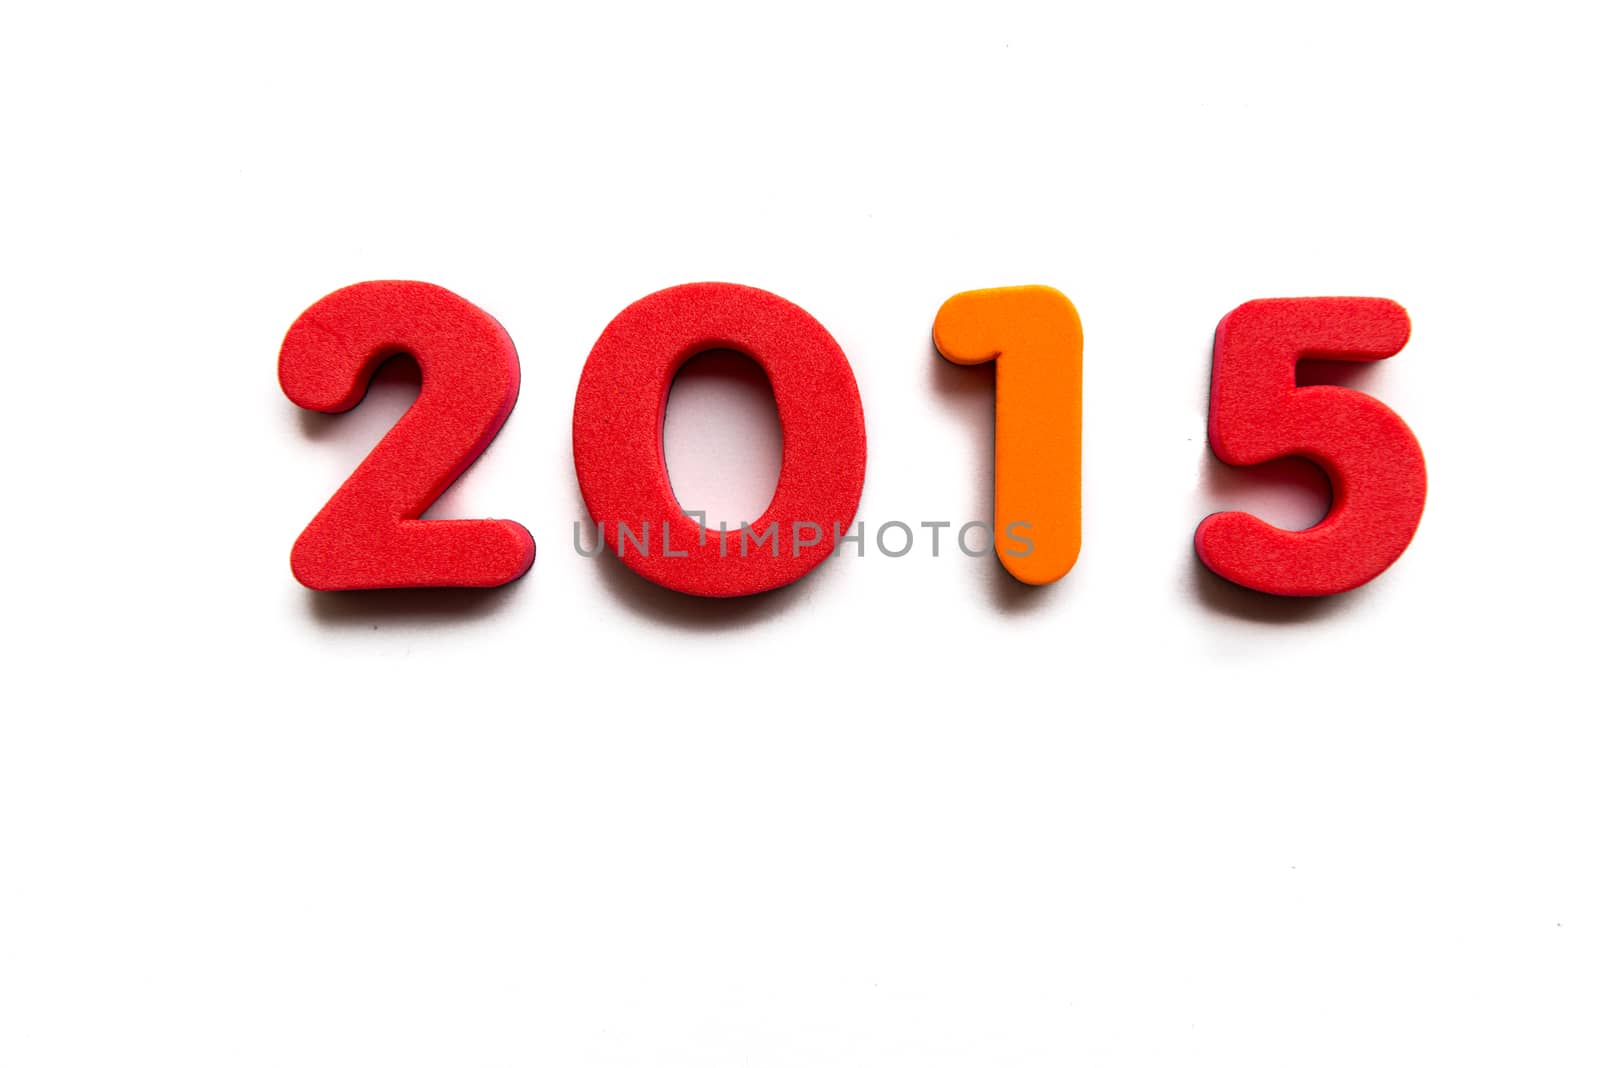 2015 word in white background